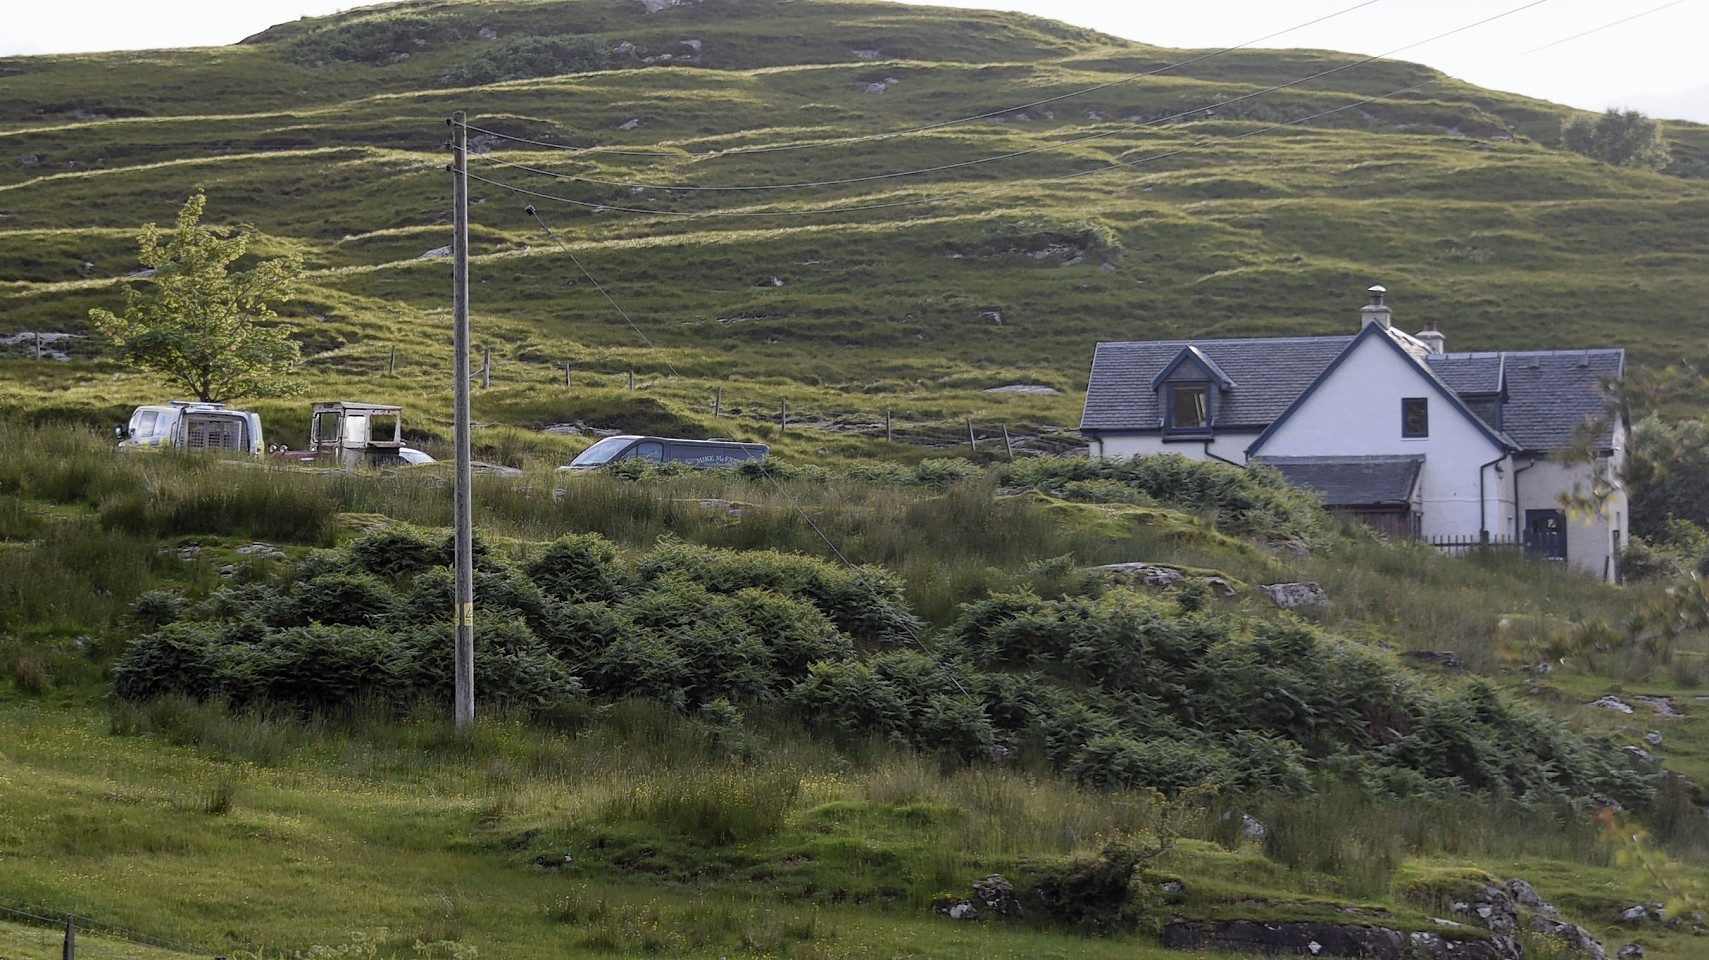 The house in Glenuig where the woman's body was found